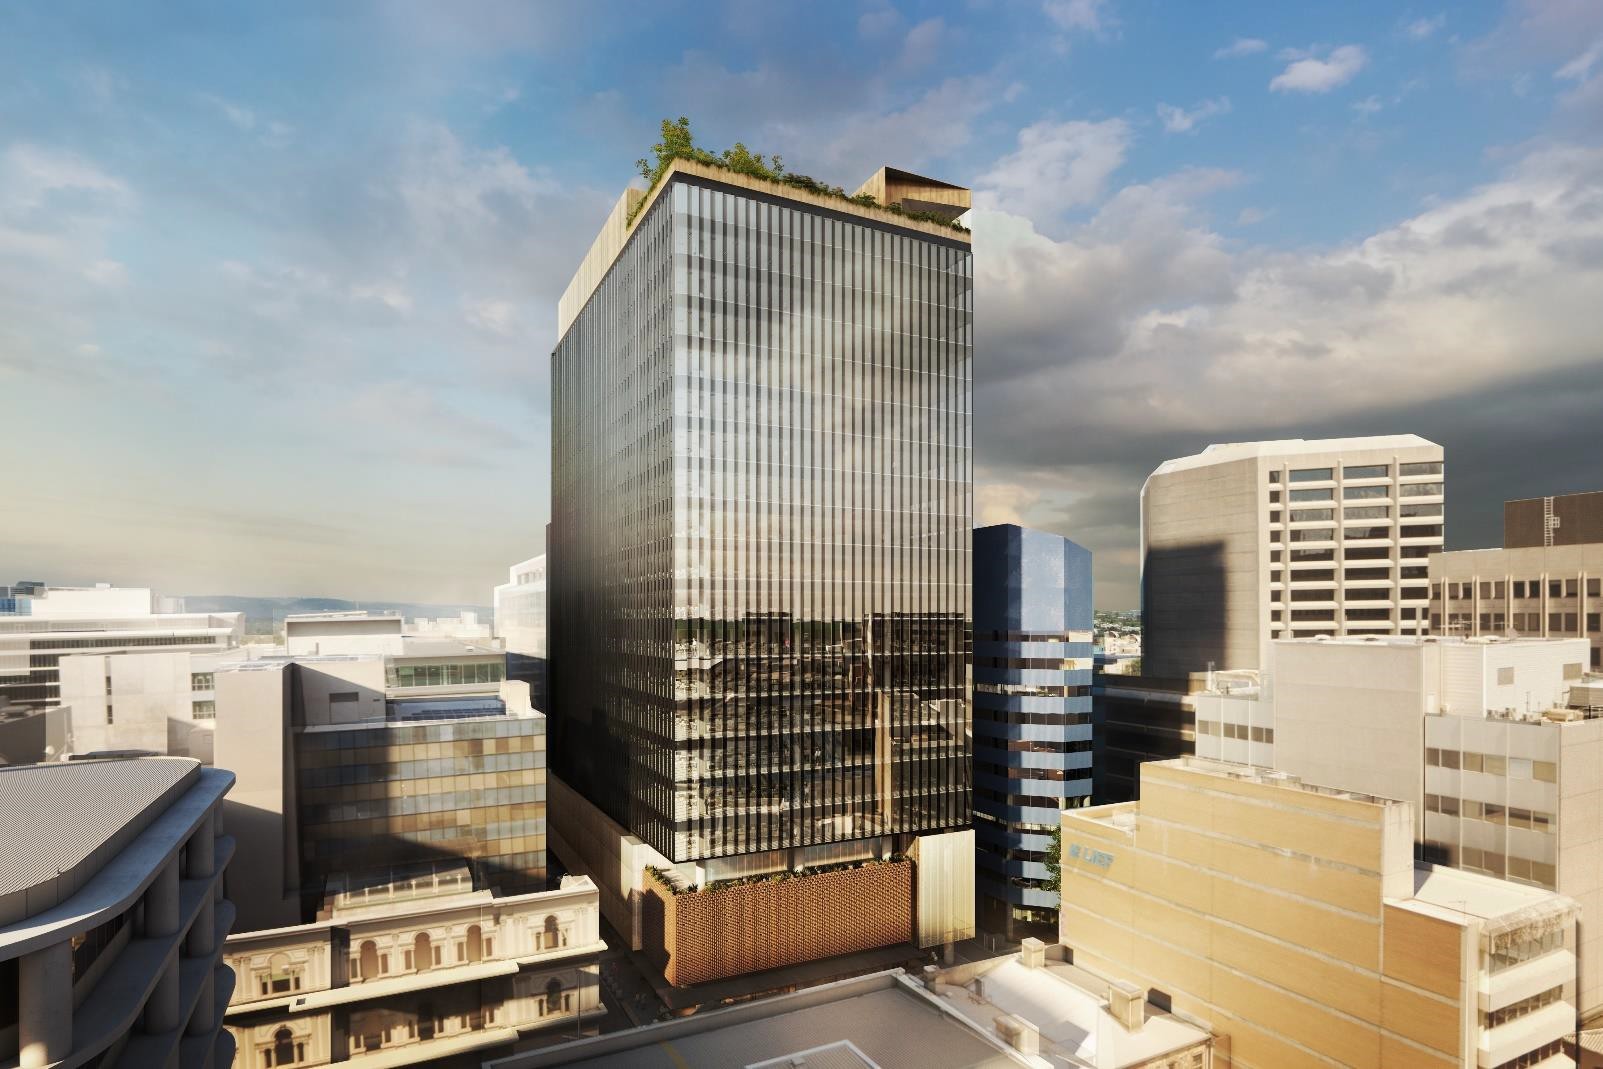 An artist's impression of a high-rise building in the CBD